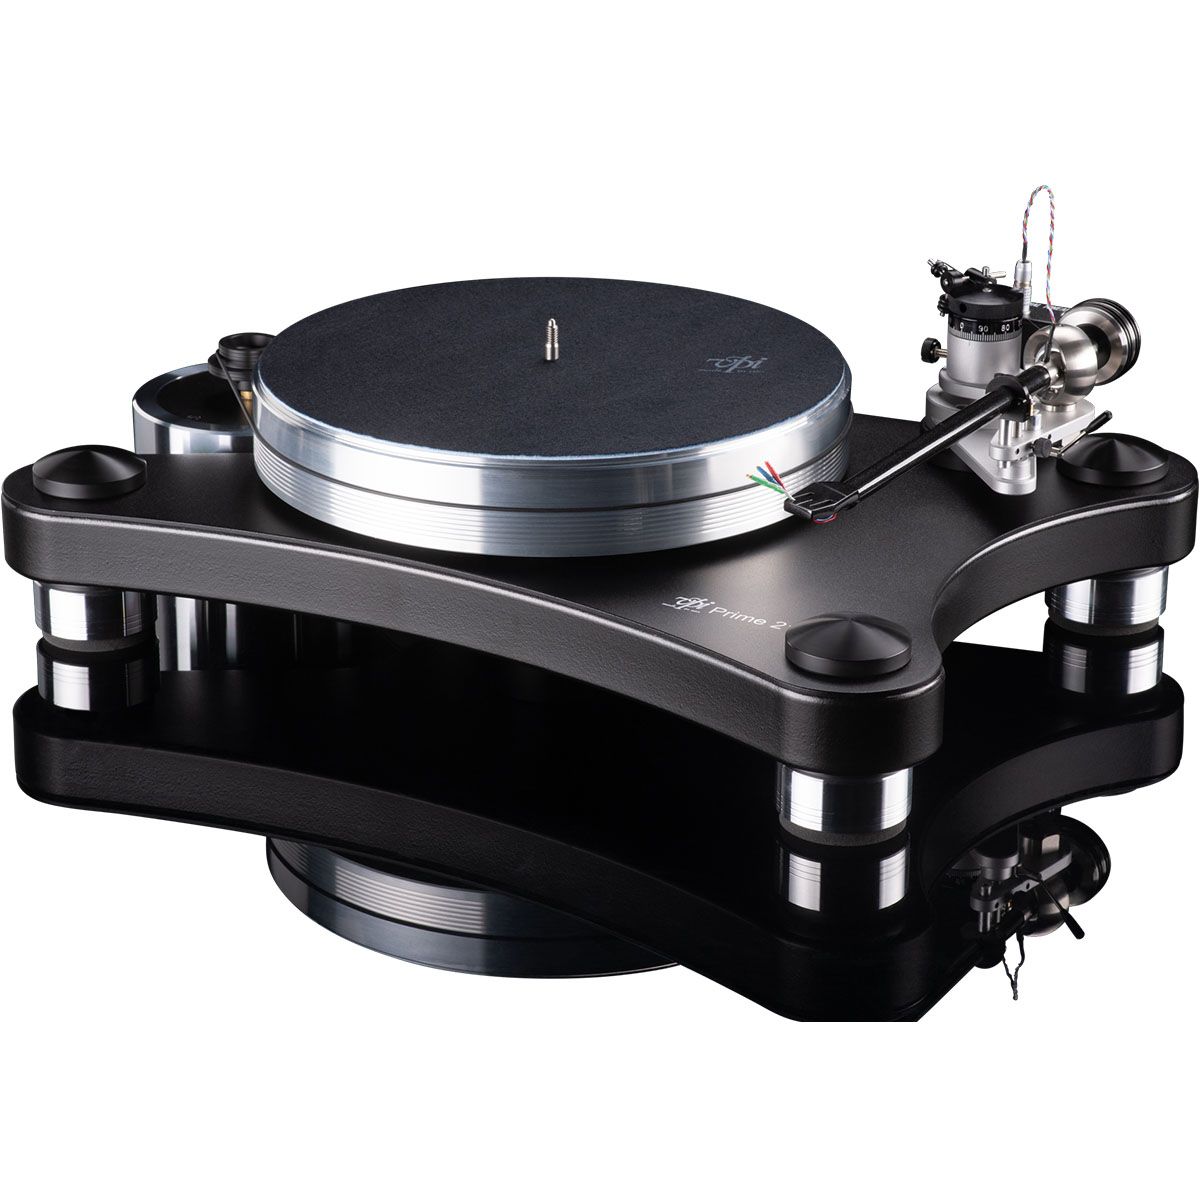 Black VPI Prime 21 Turntable View From Right Angle